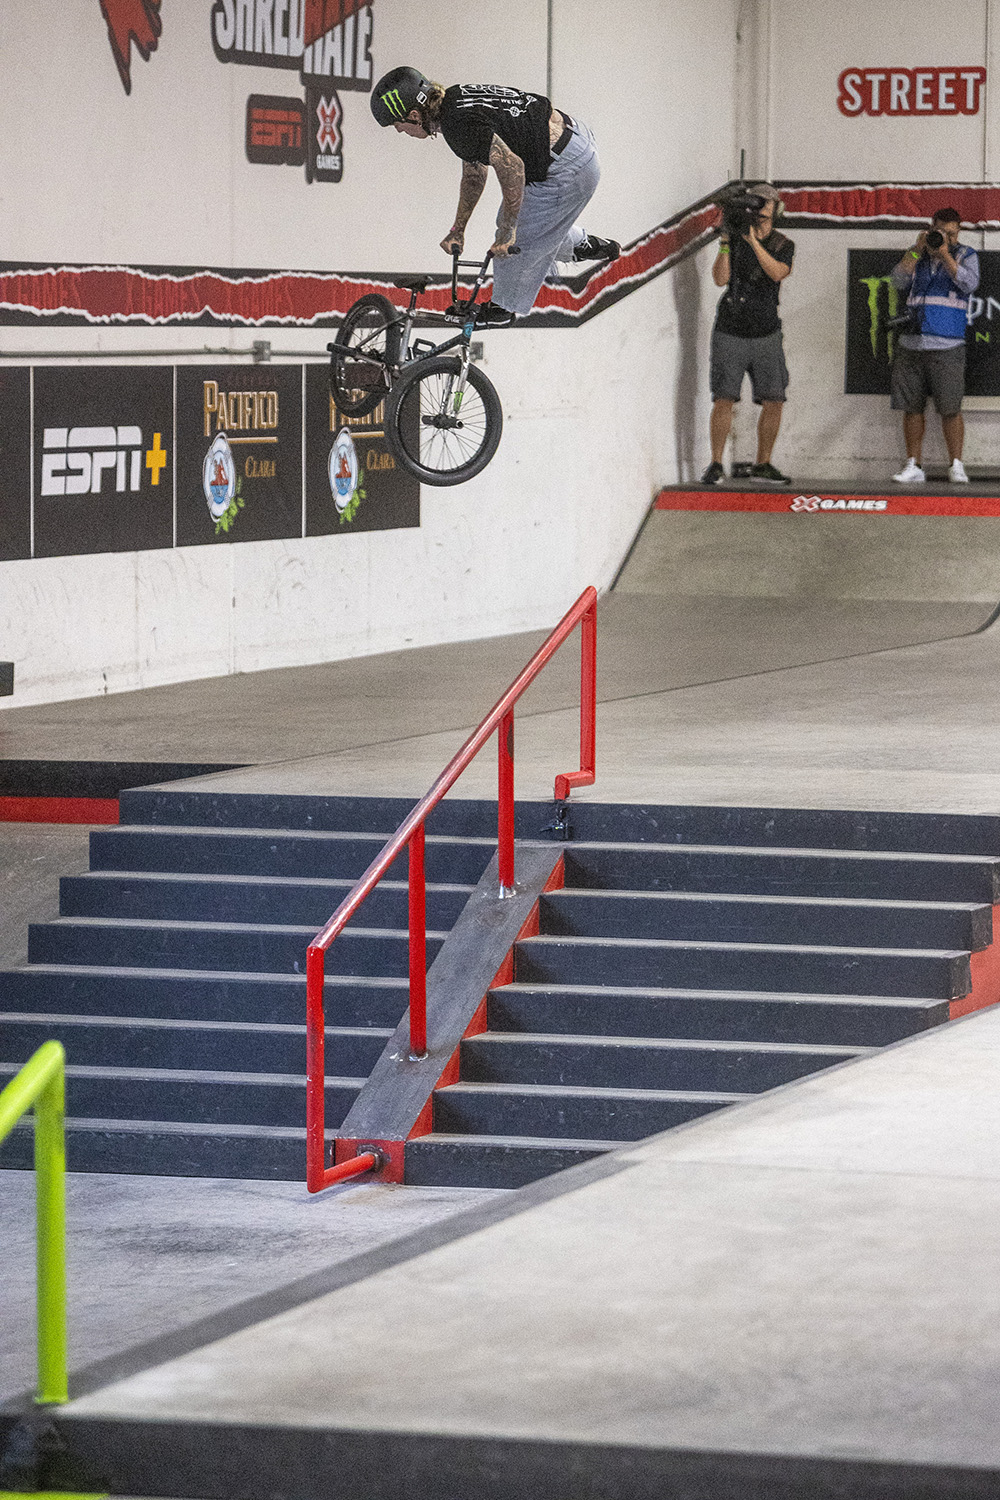 Monster Energy’s Felix Prangenberg Claims BMX Street Silver on Day Three of X Games 2022 at the California Training Facility in Vista, California.